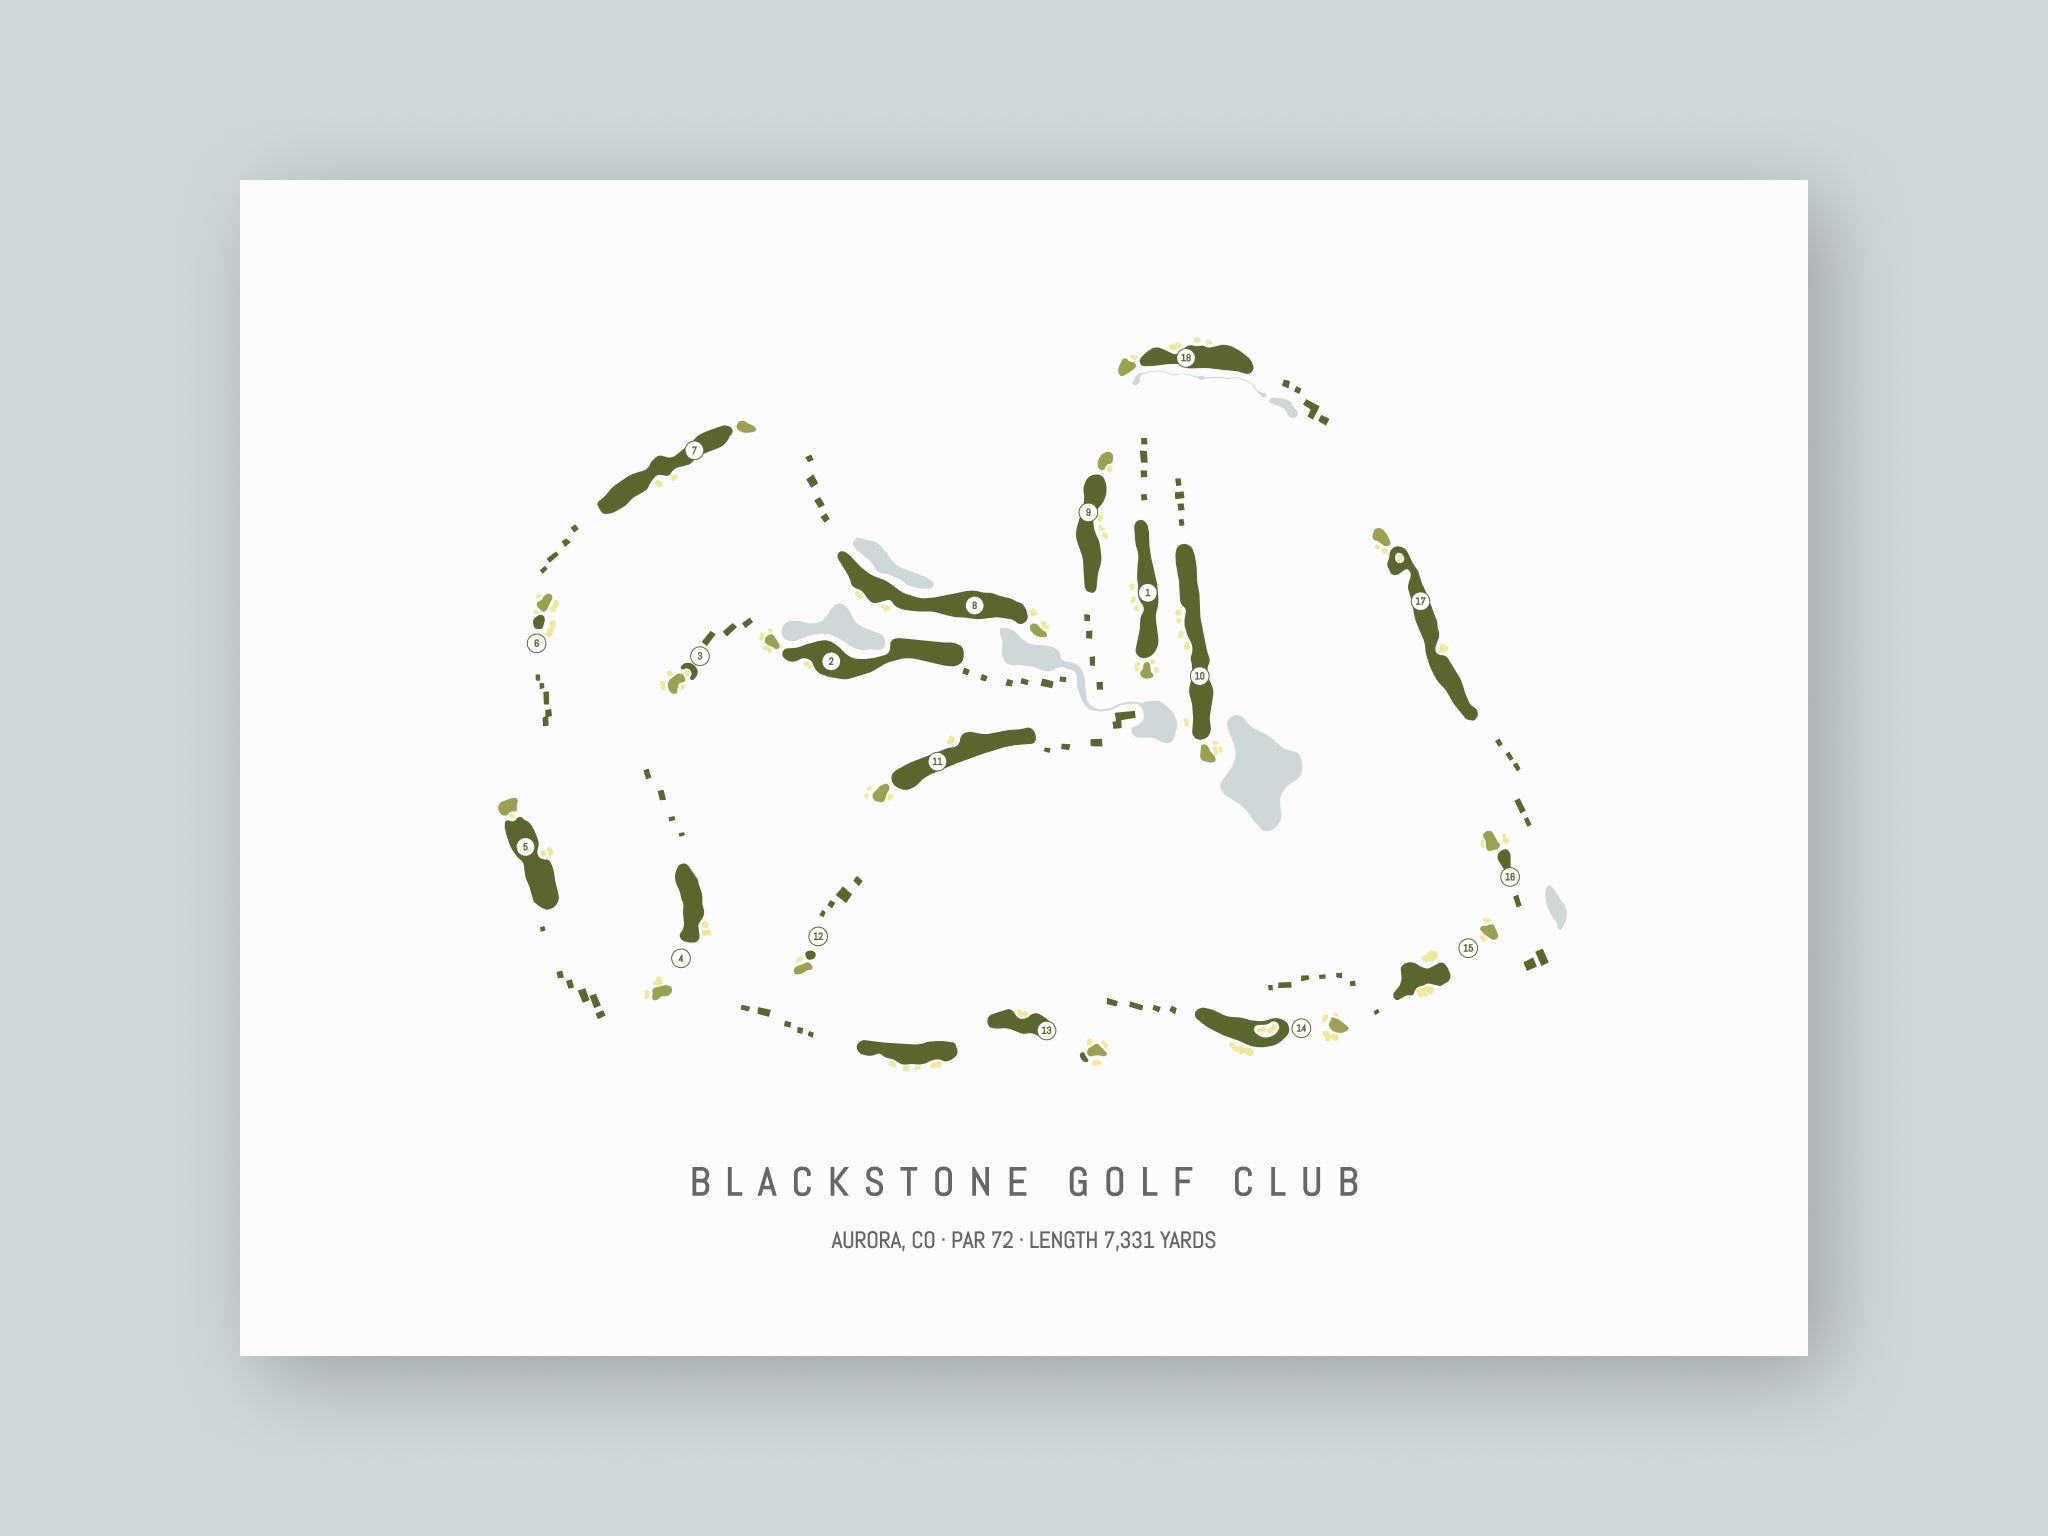 Blackstone-Golf-Club-CO--Unframed-24x18-With-Hole-Numbers